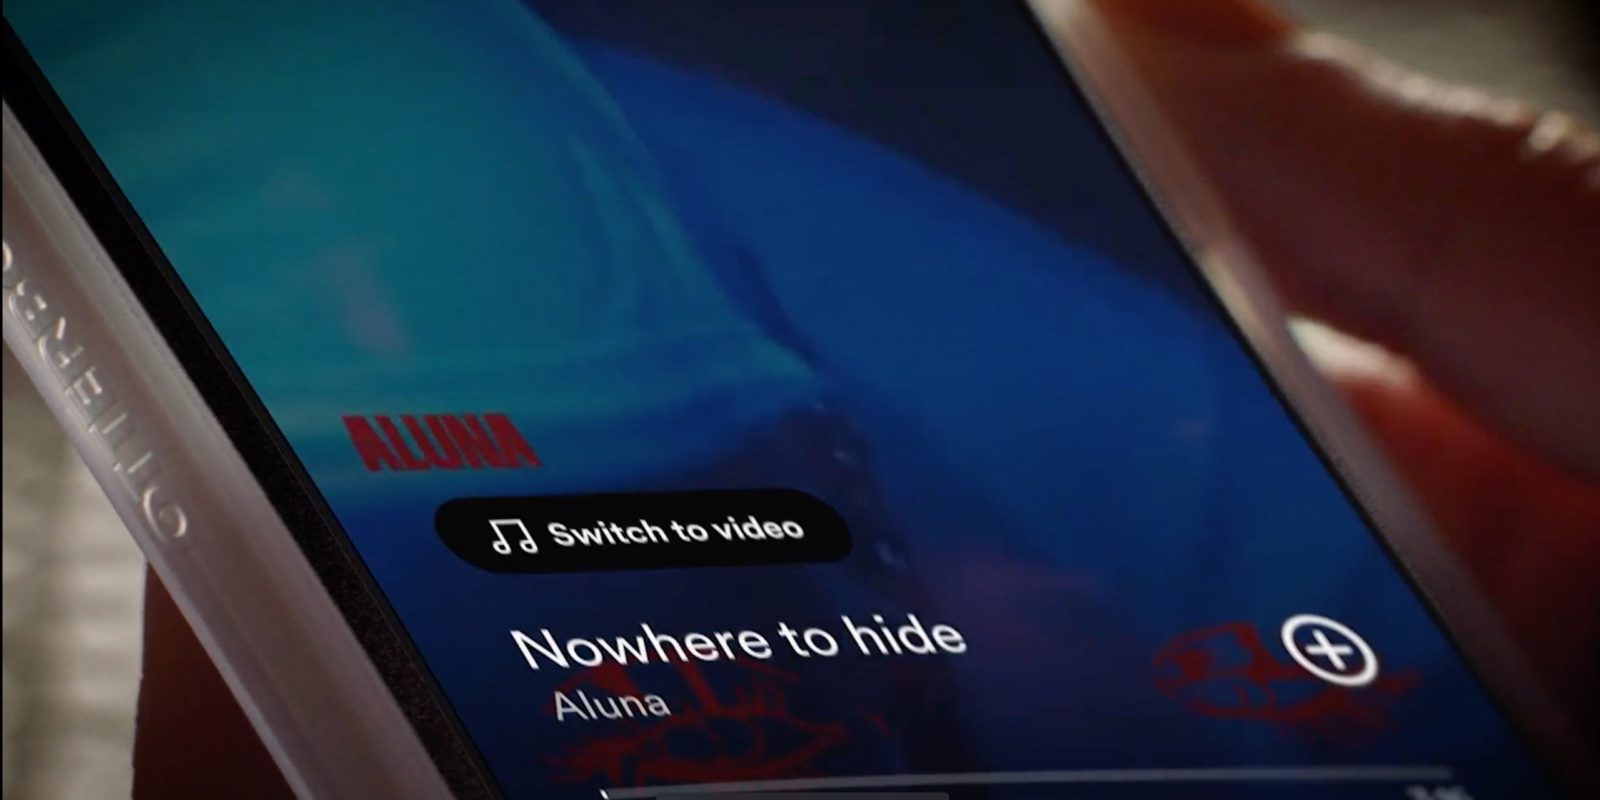 Spotify music videos | Close-up of Switch to Video button